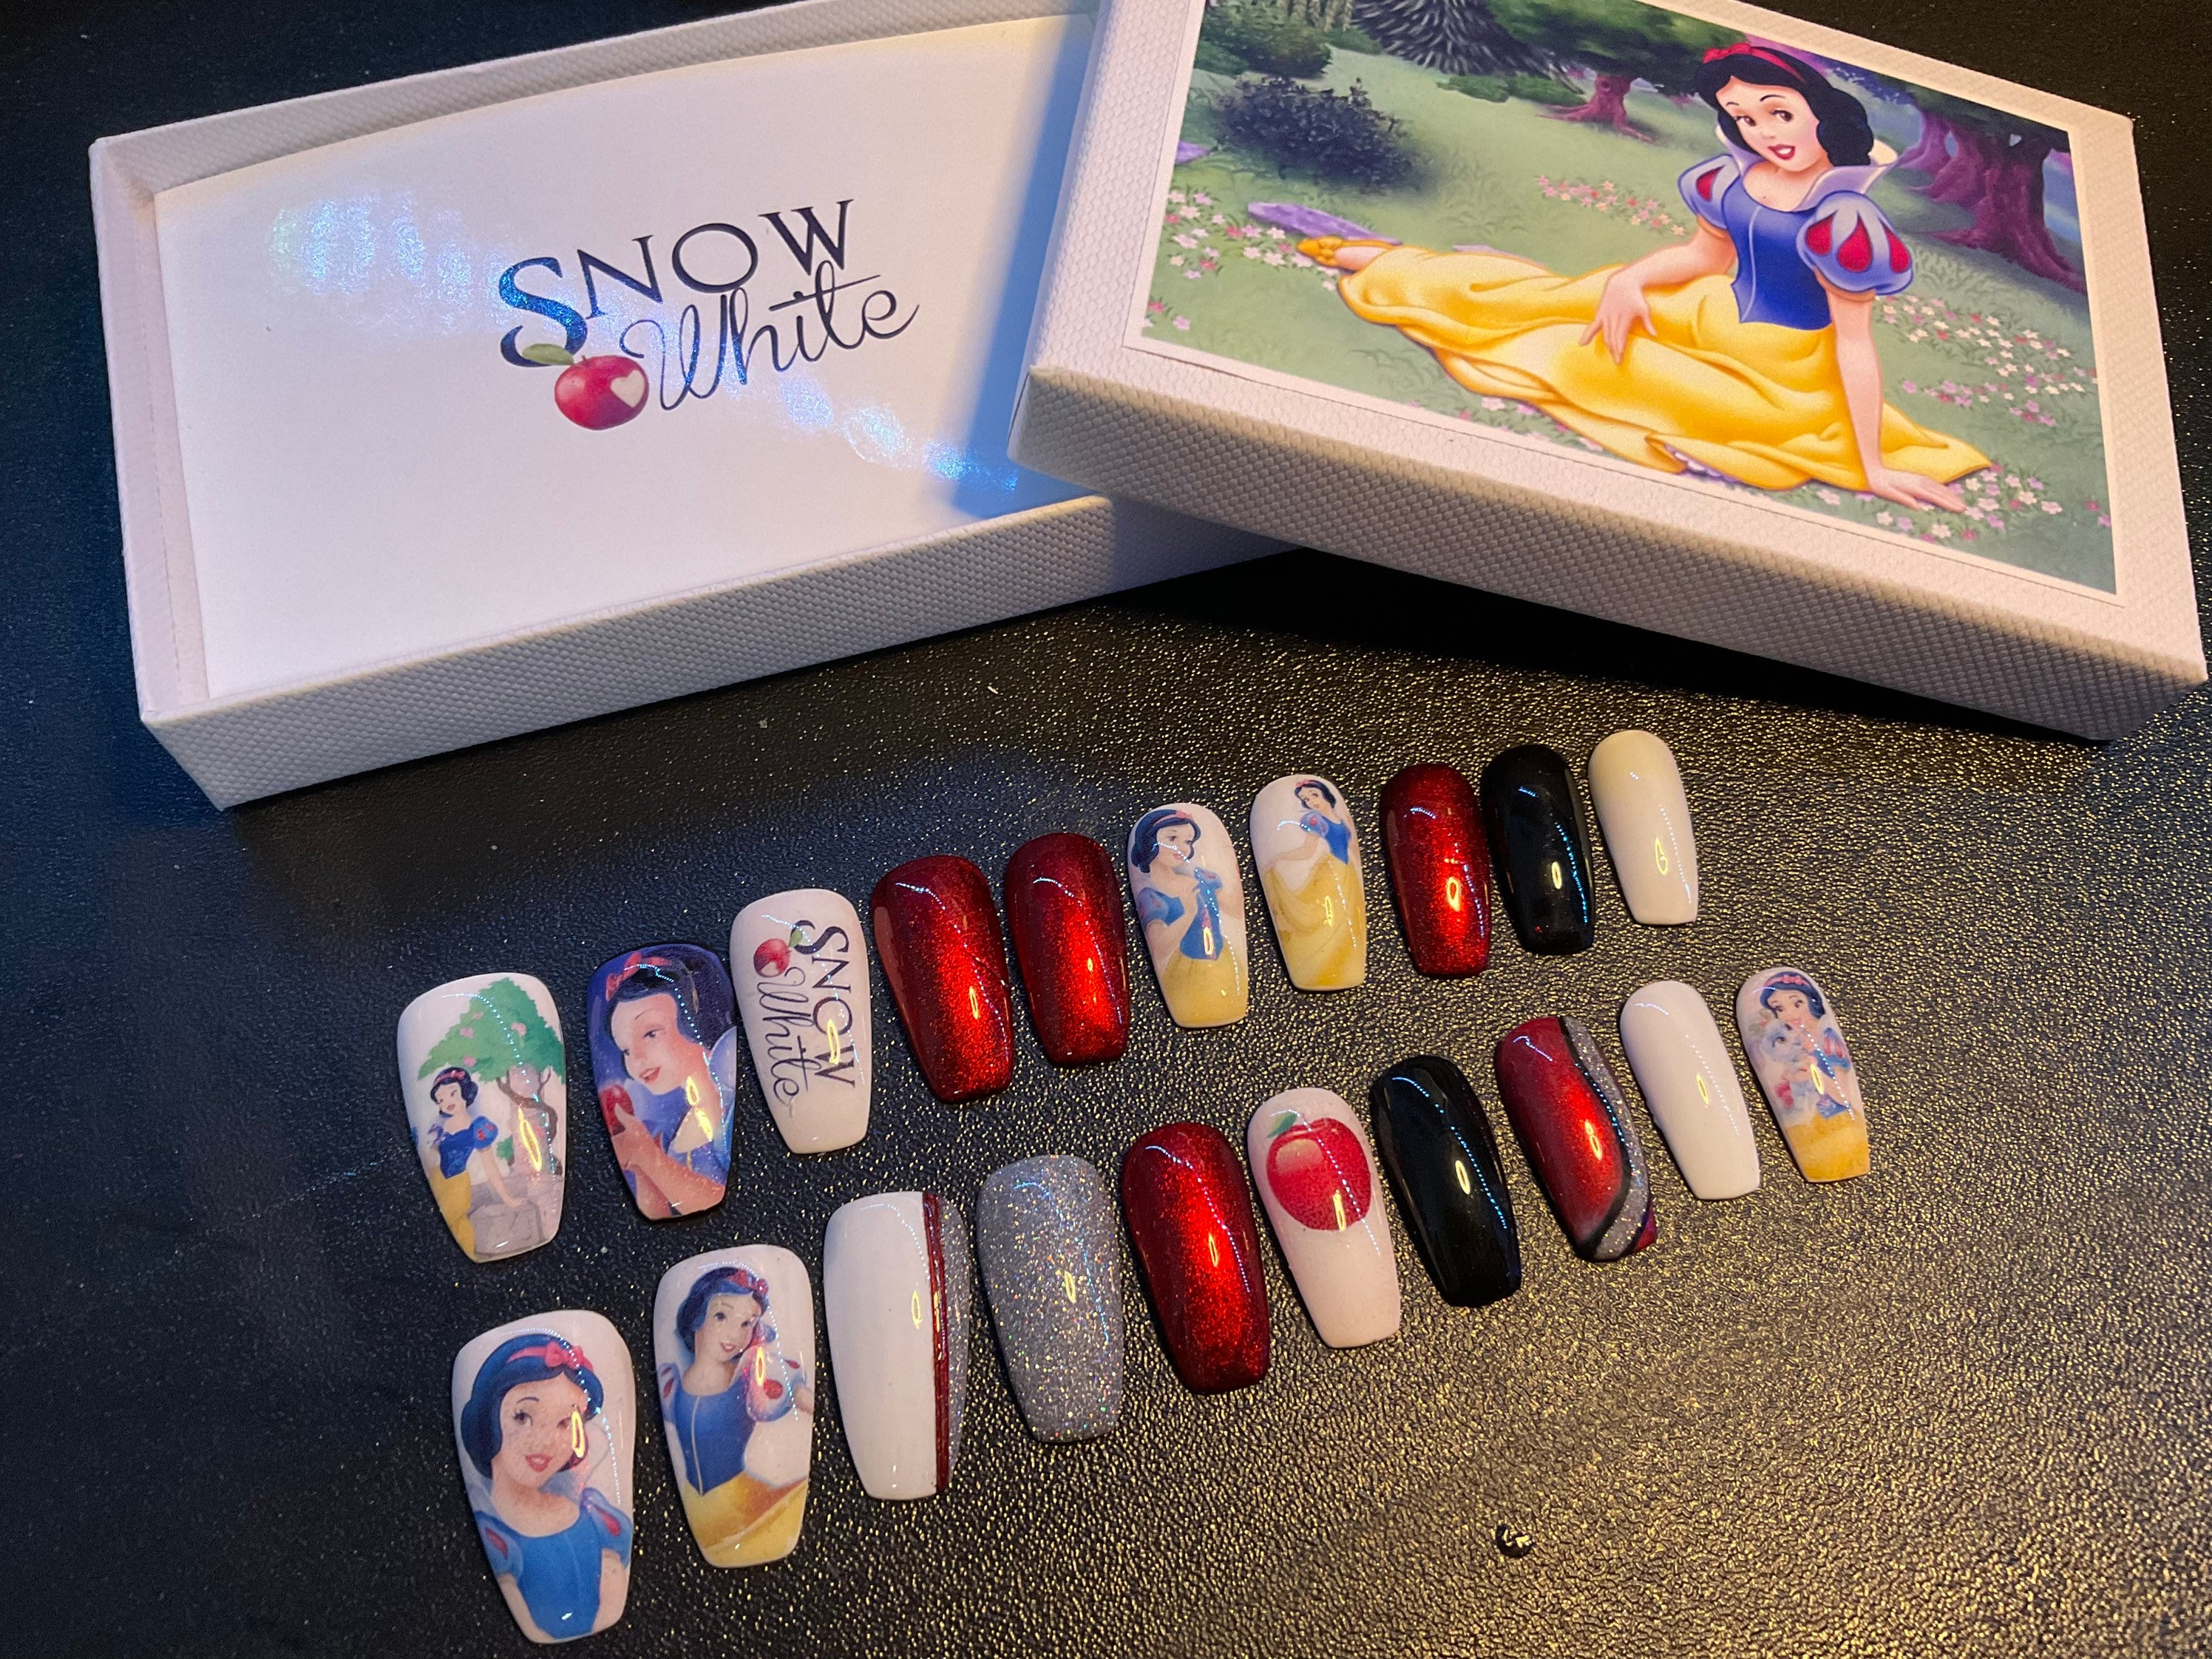 Halloween gel nails - Snow White poison apple and the evil queen.